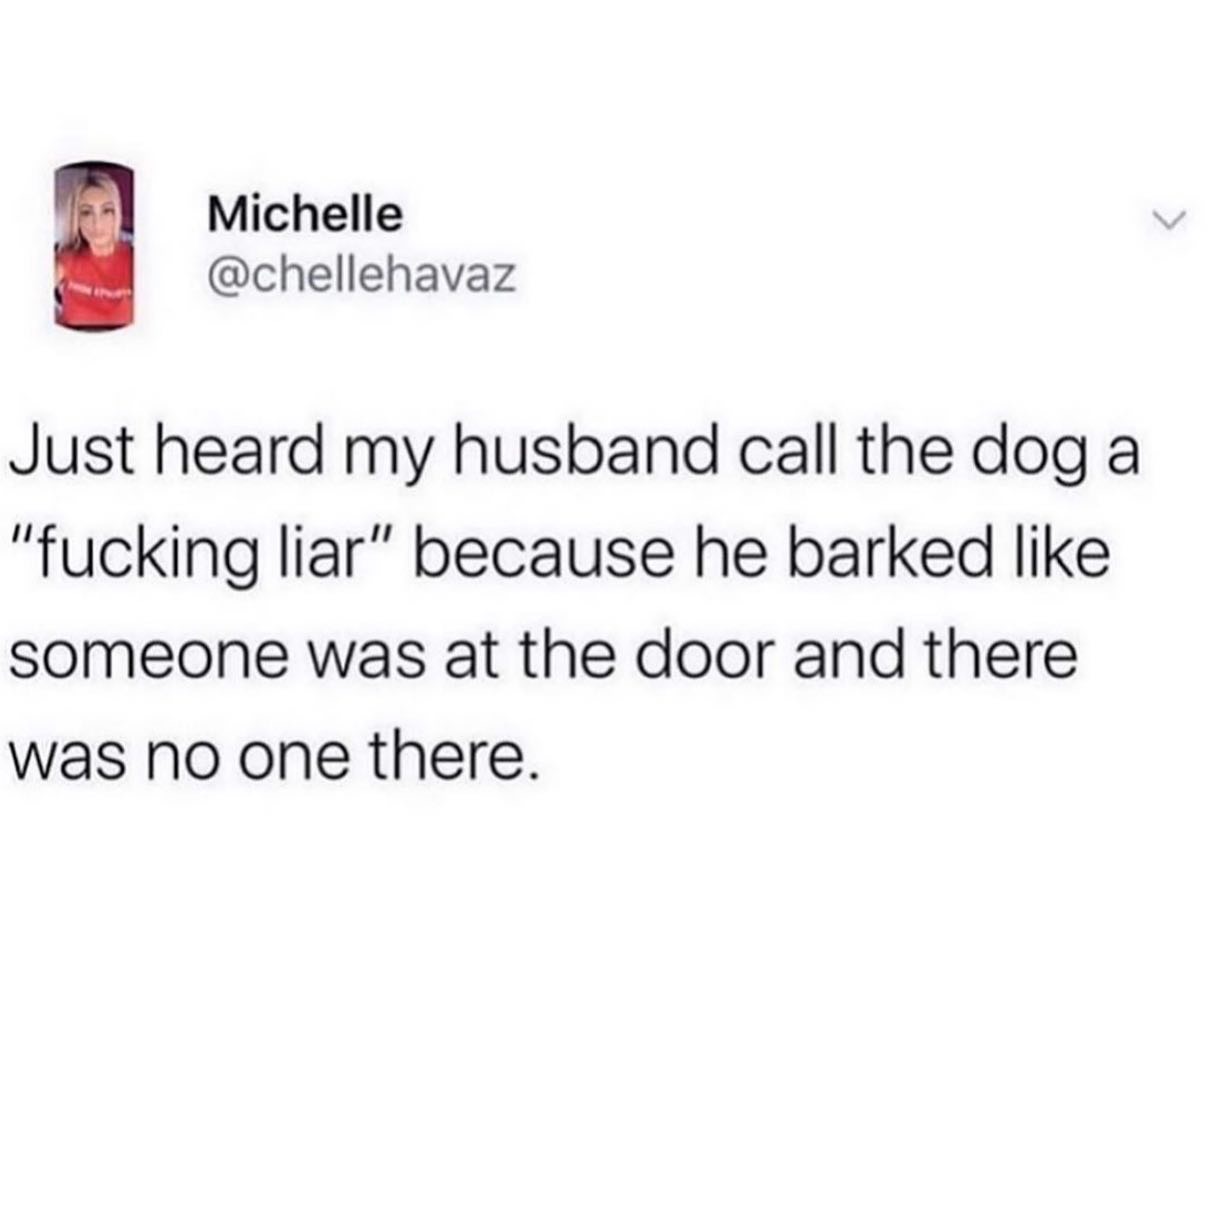 document - Michelle Just heard my husband call the dog a "fucking liar" because he barked someone was at the door and there was no one there.